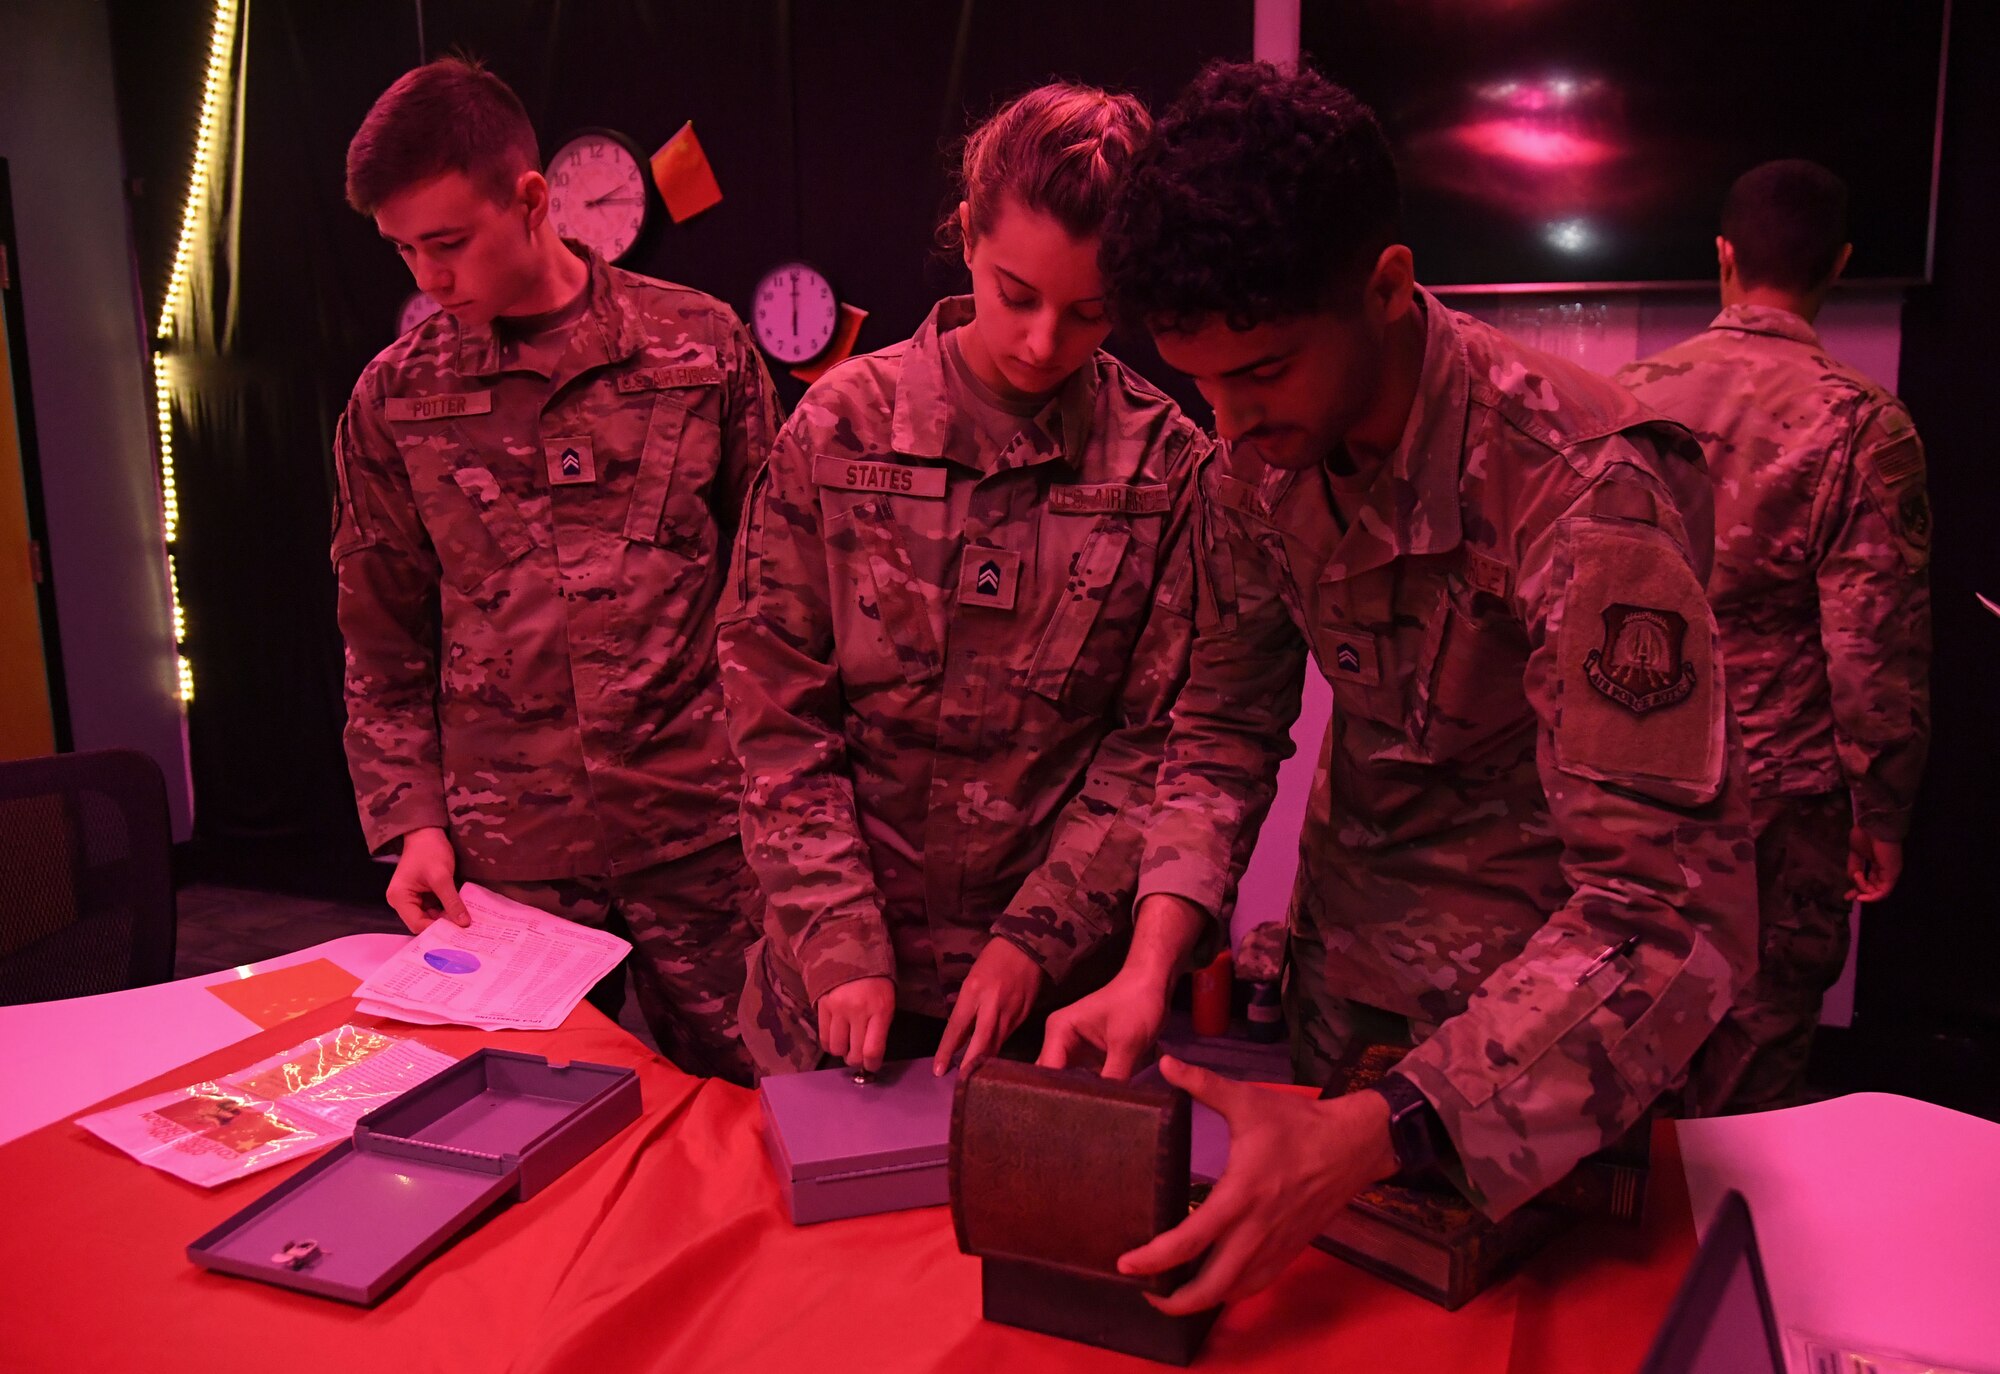 Joe Potter, Jessica States and Ahmed Alshariki, University of Alabama Air Force ROTC cadets, participate in the 333rd Training Squadron cyber escape room, during Pathways to Blue inside Stennis Hall at Keesler Air Force Base, Mississippi, April 1, 2023.